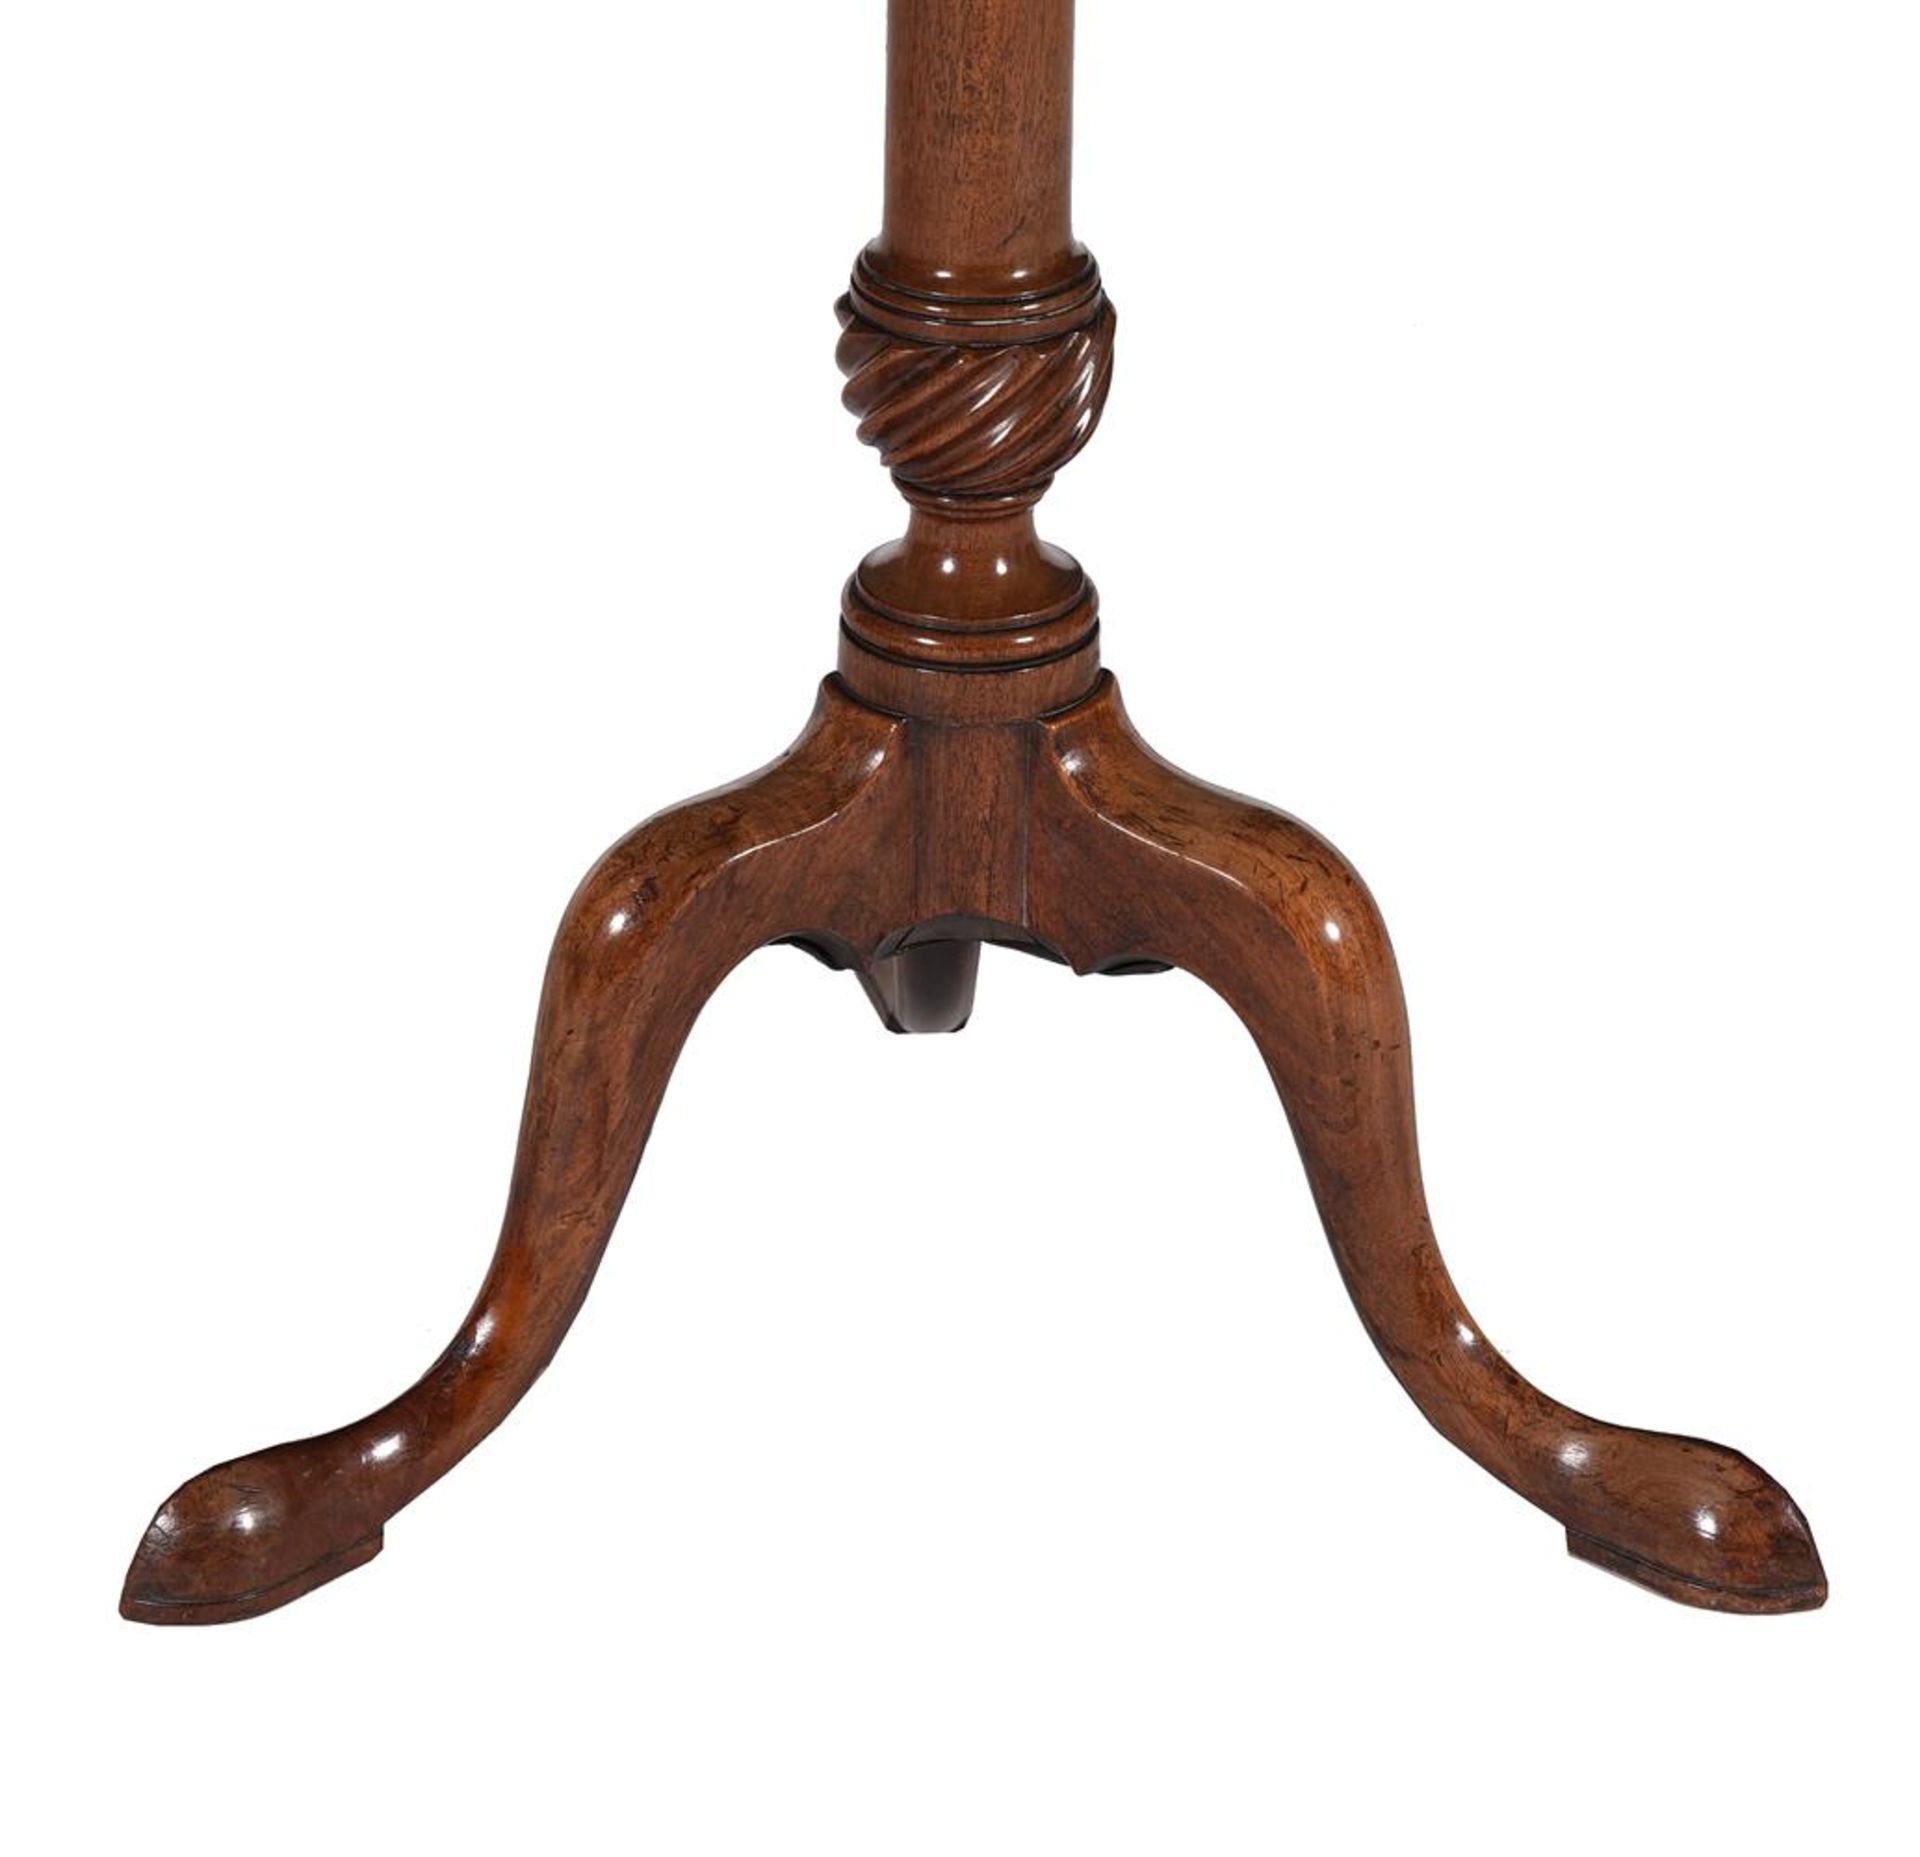 A GEORGE III GUADELOUPE MAHOGANY HEXAGONAL TRIPOD TABLE, POSSIBLY BY THOMAS CHIPPENDALE, CIRCA 1765 - Image 4 of 4